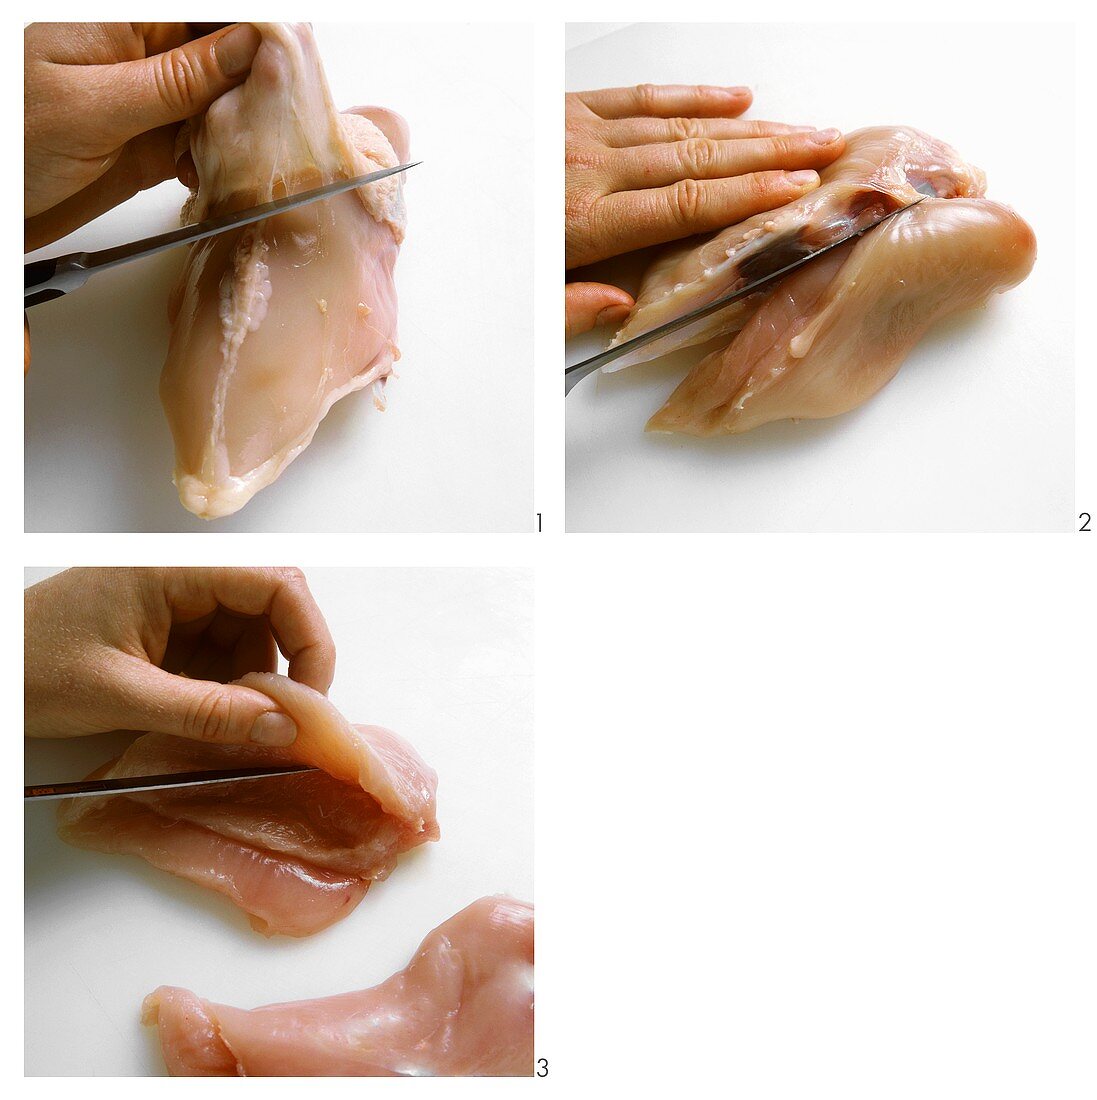 Removing breast meat